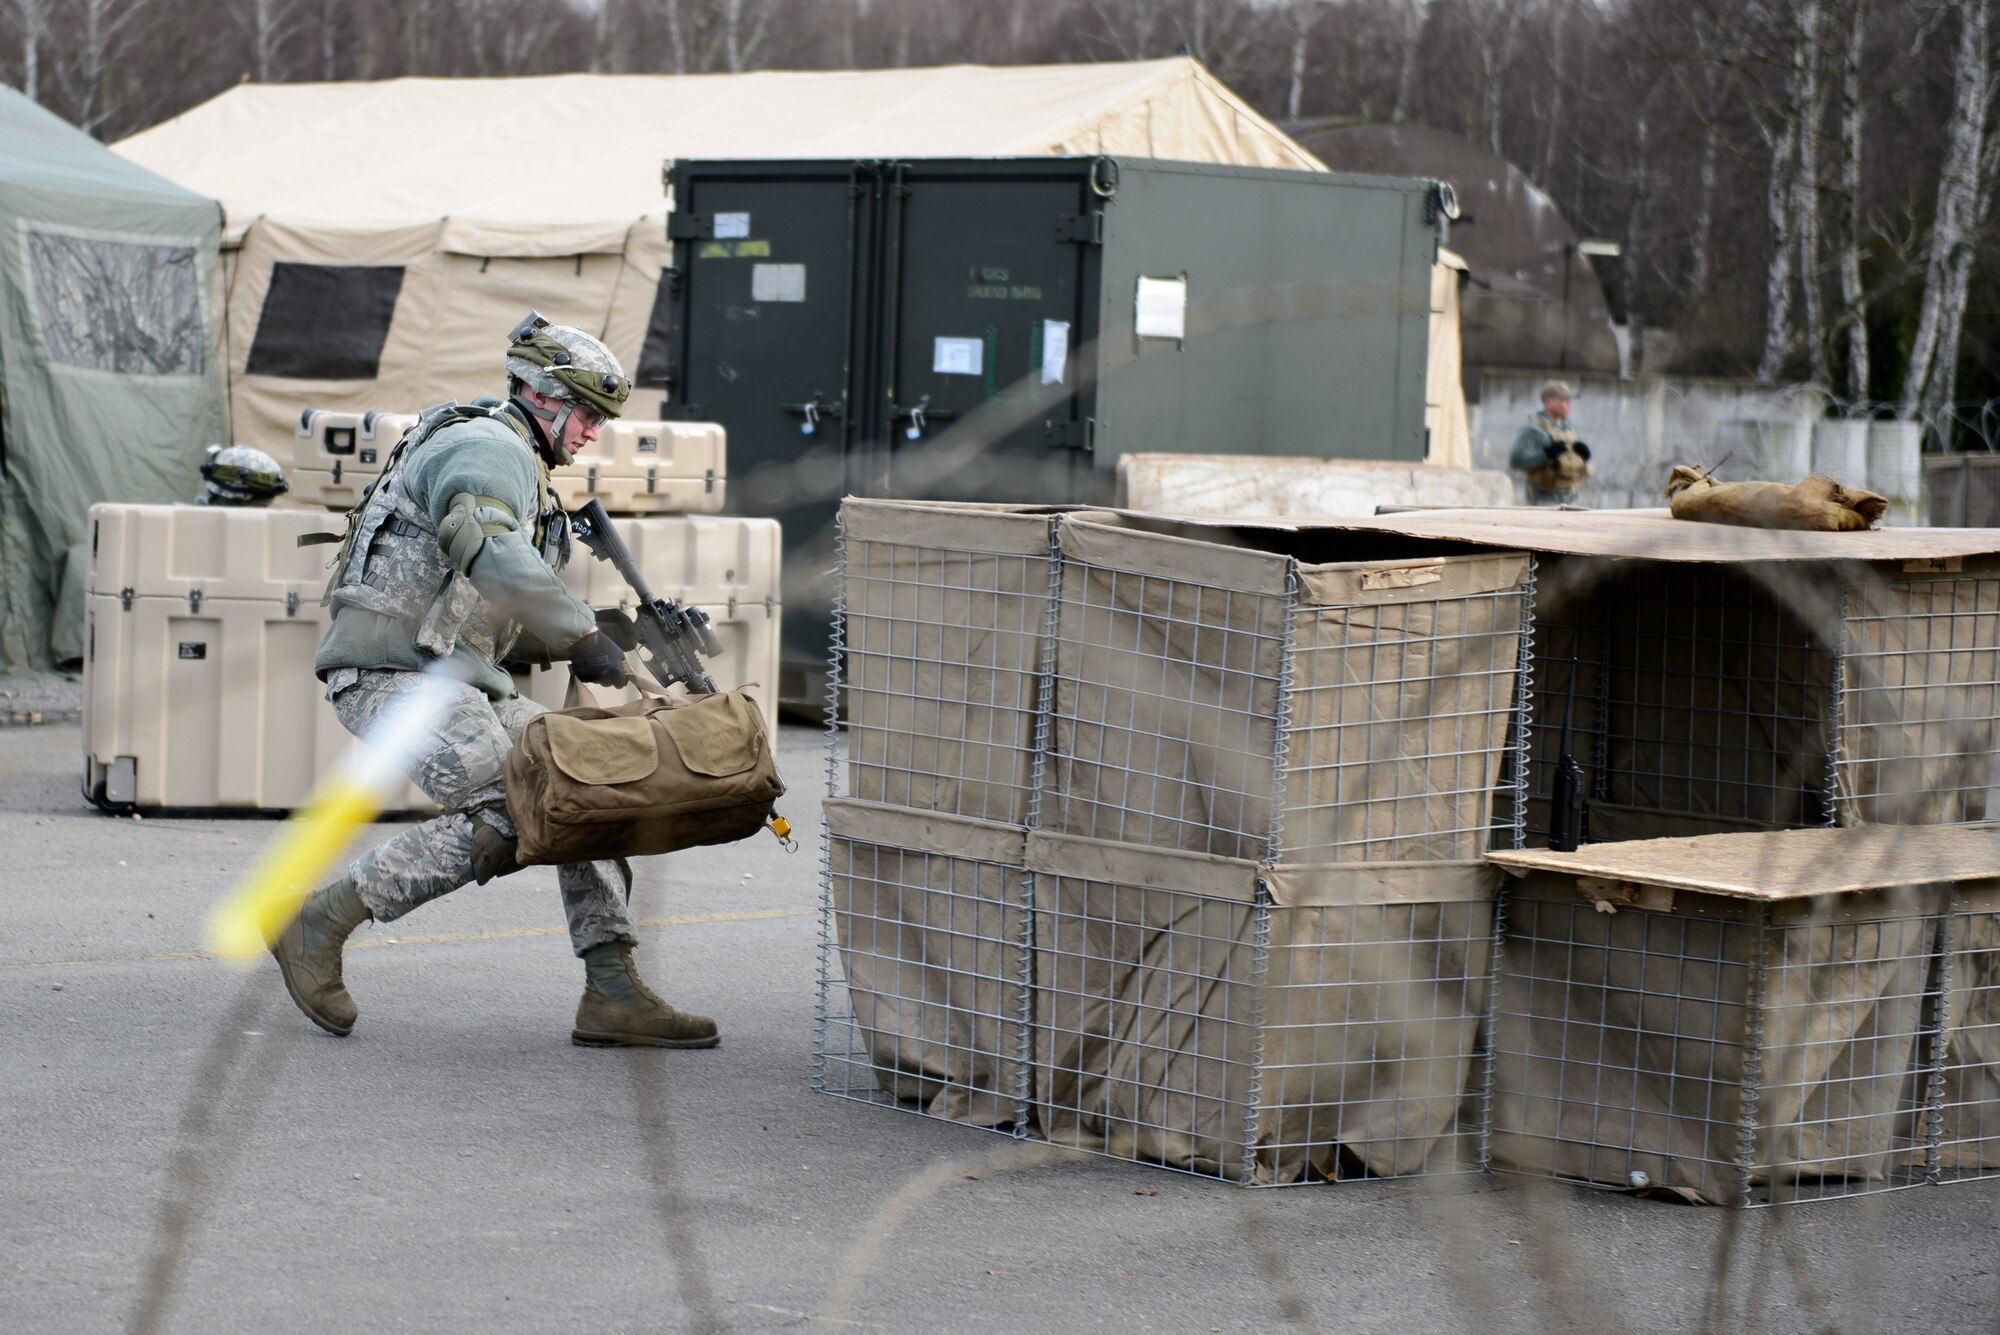 Senior Airman Zachery Davis, 1st Combat Communications Squadron electrical power production technician, positions himself to counter a mock opposition forces attack on Ramstein Air Base, Germany Feb. 12, 2016. The 1st CBCS trains Airmen in a variety of scenarios as they may deploy to any part of the European and African theaters. (U.S. Air Force photo/Staff Sgt. Armando A. Schwier-Morales)